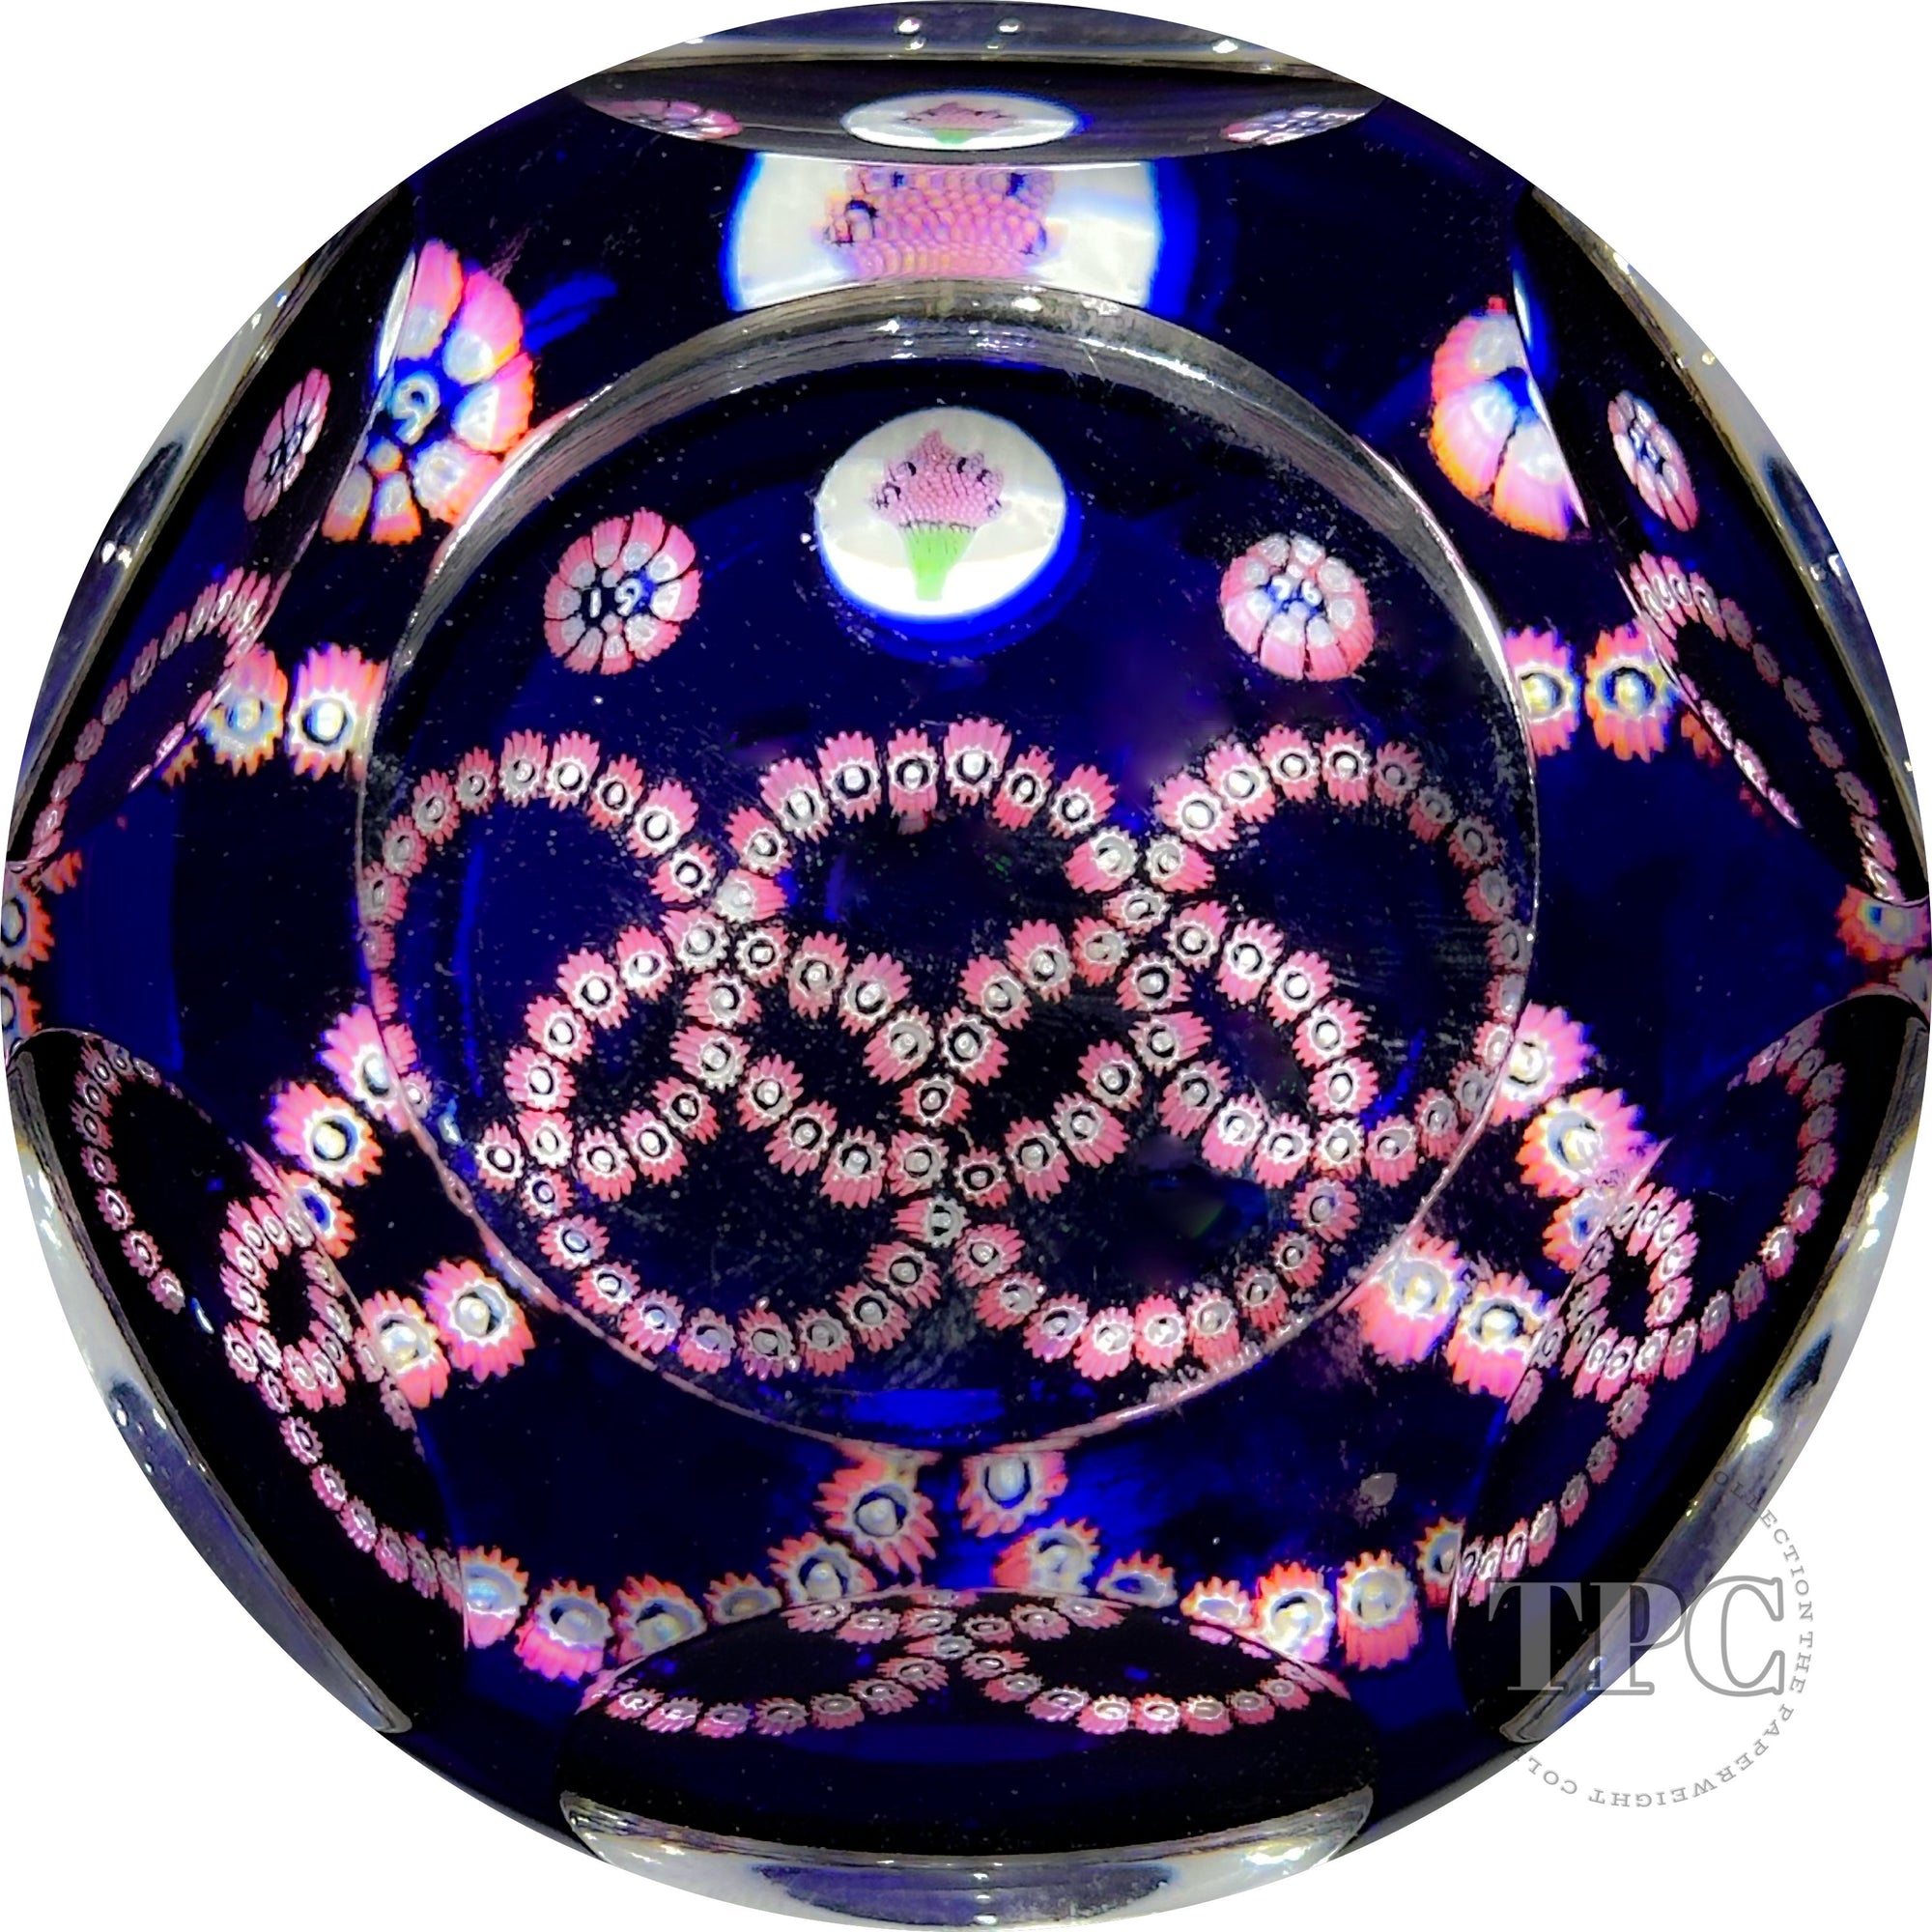 Whitefriars 1976 Glass Art Paperweight Olympic Games Patterned Millefiori on Blue